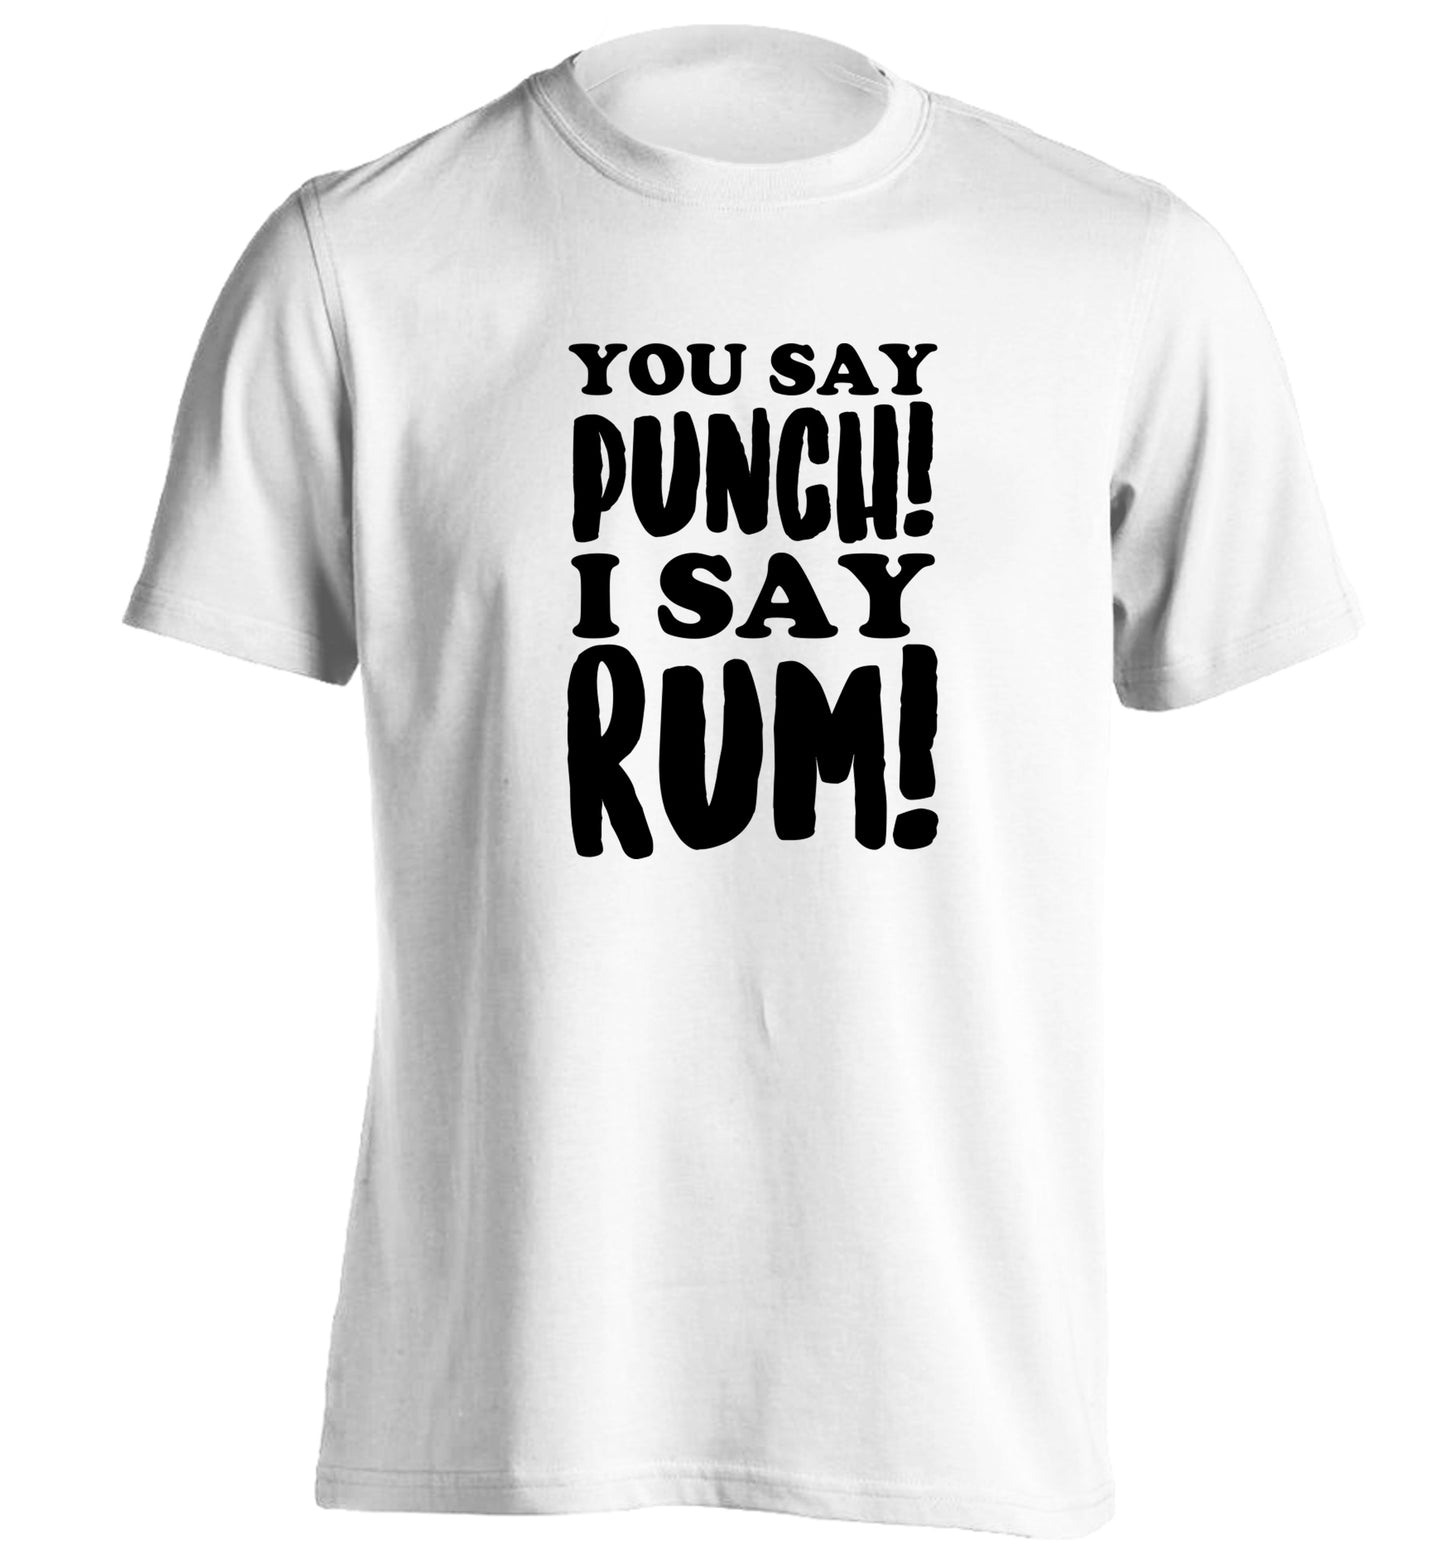 You say punch I say rum! adults unisex white Tshirt 2XL